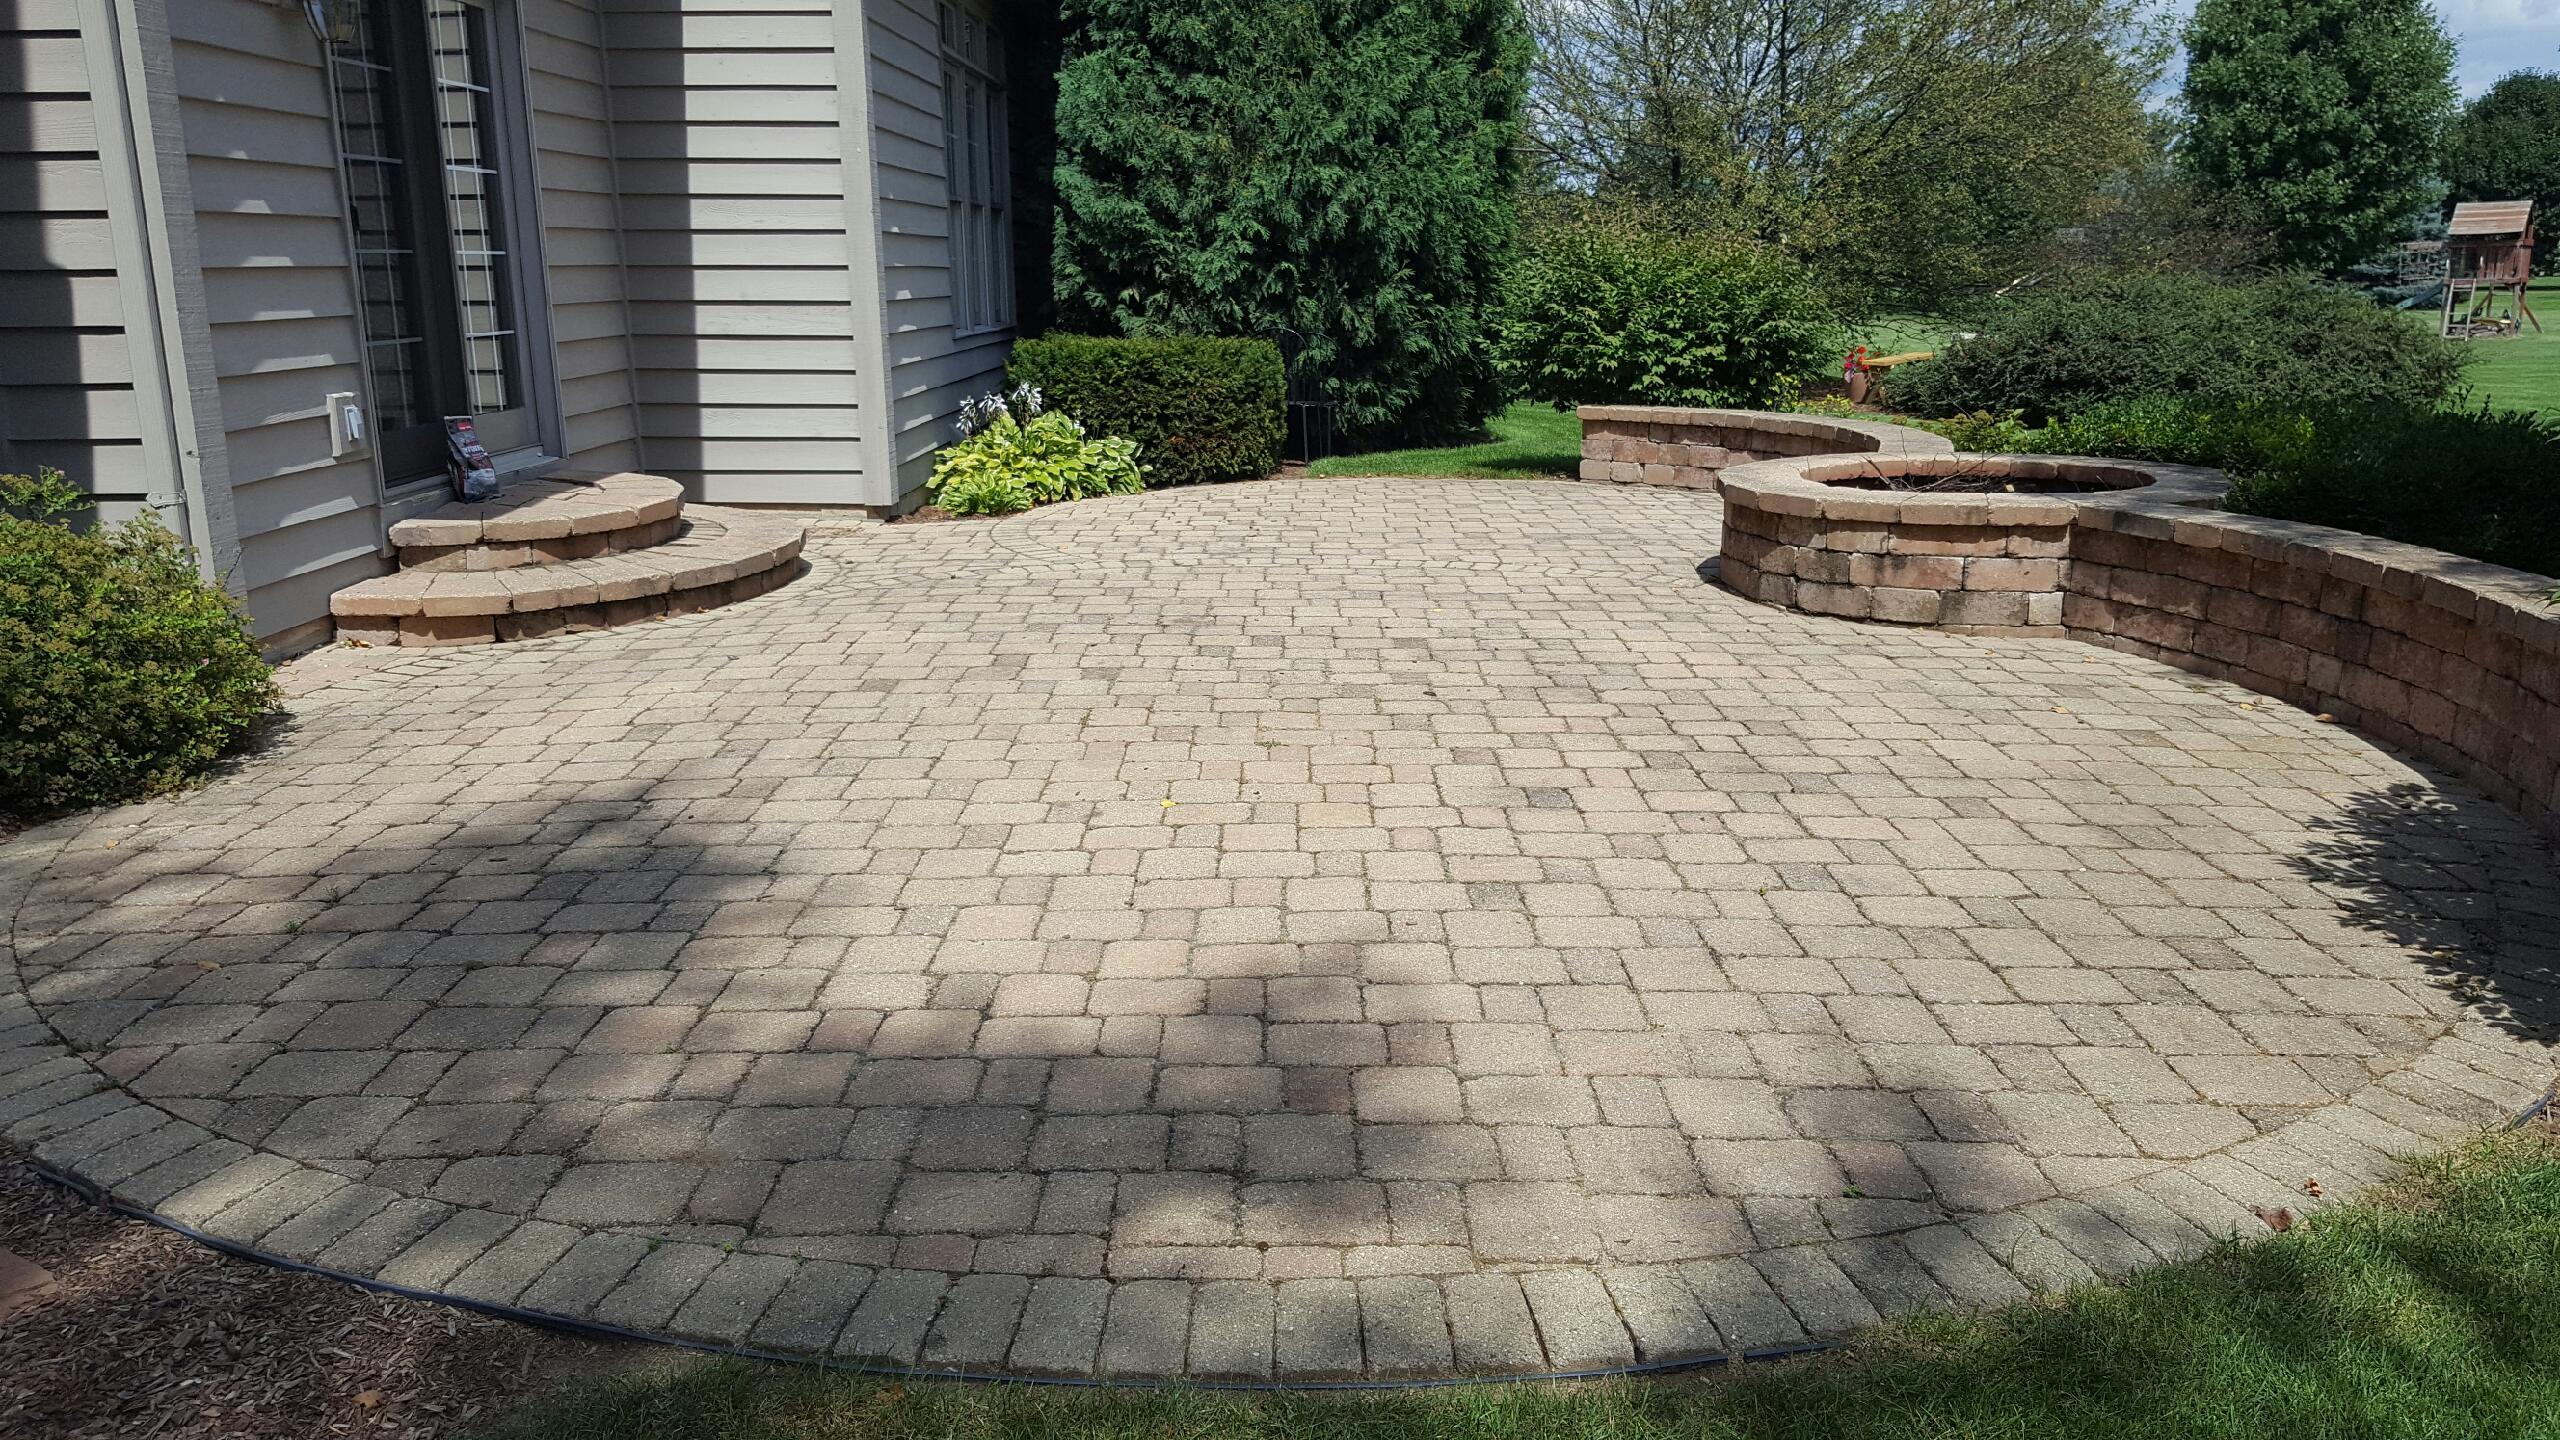 Brick PAver cleaning and sealing in St. Charles, IL